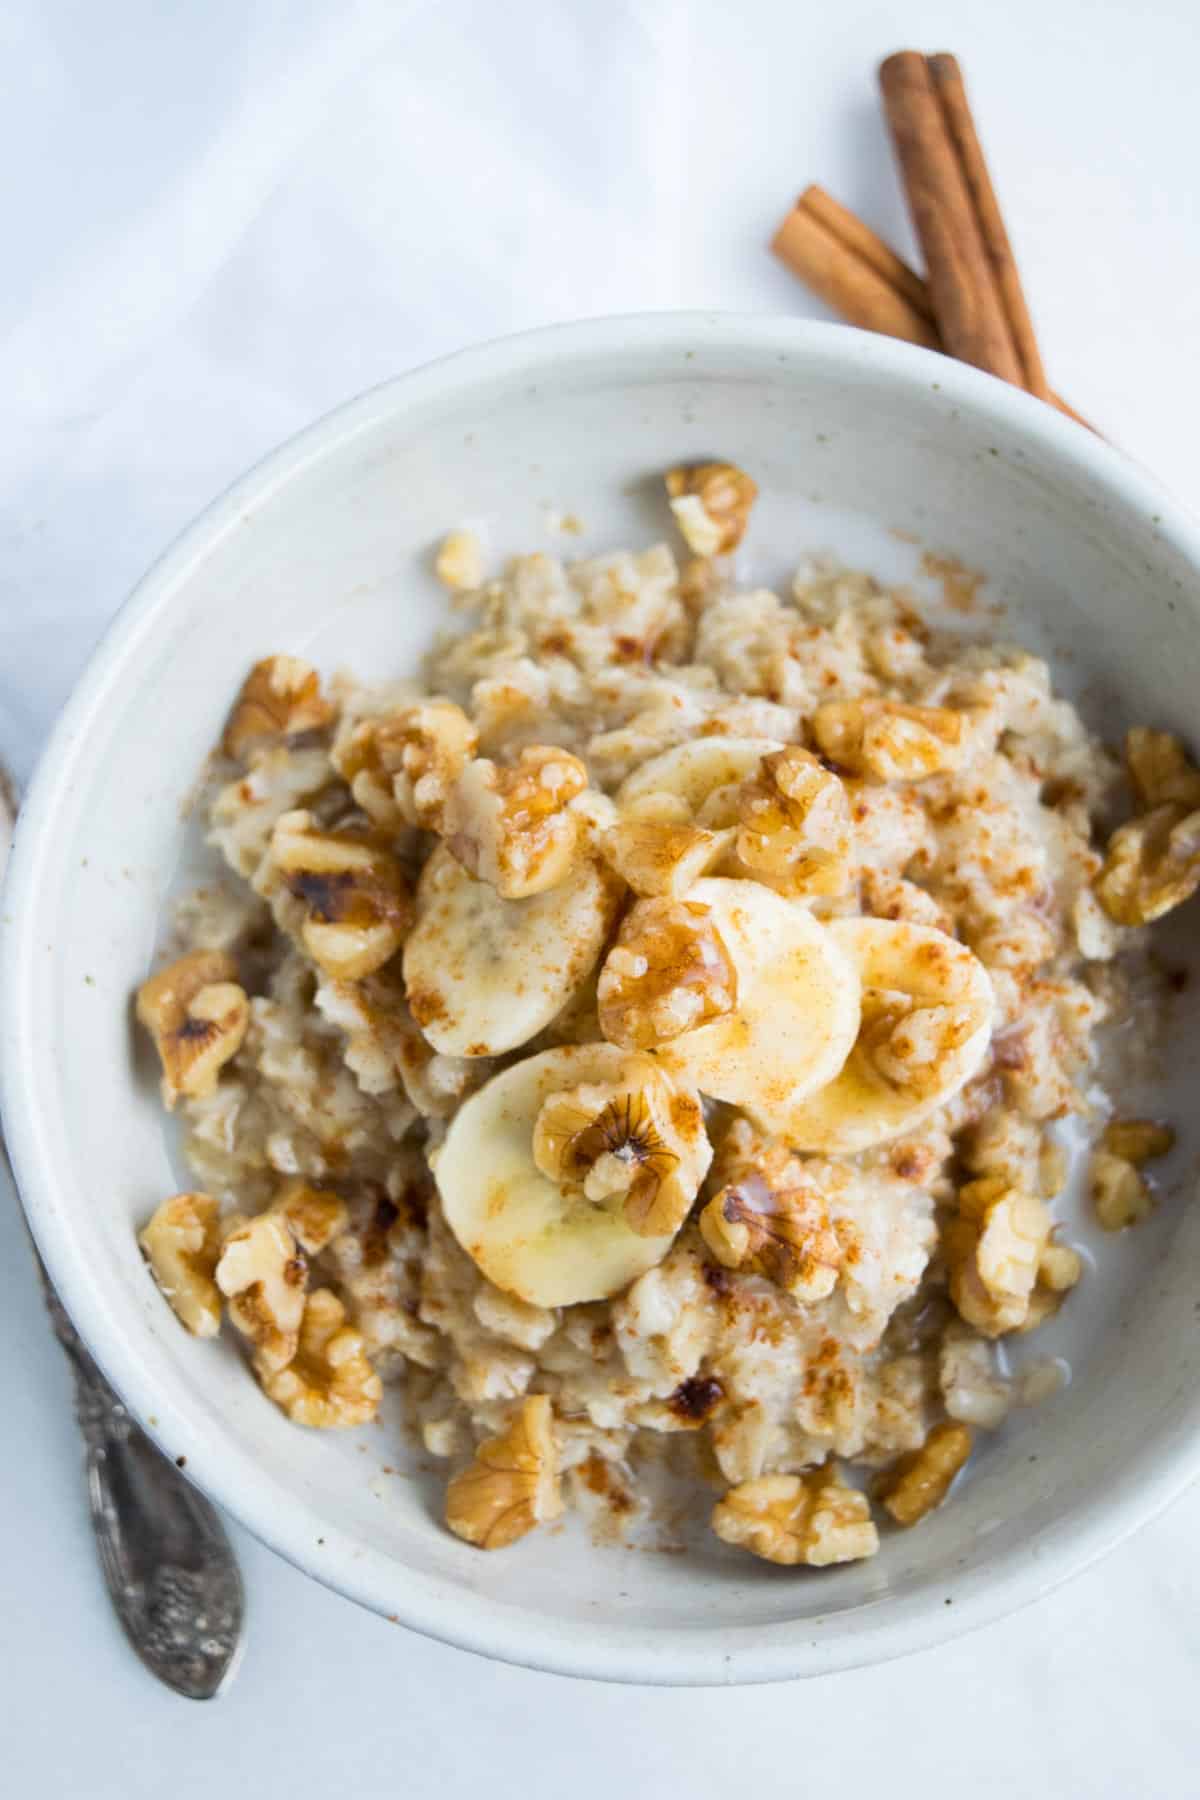 7 Health Benefits of Oatmeal (+ Our Favorite Oatmeal Recipes)